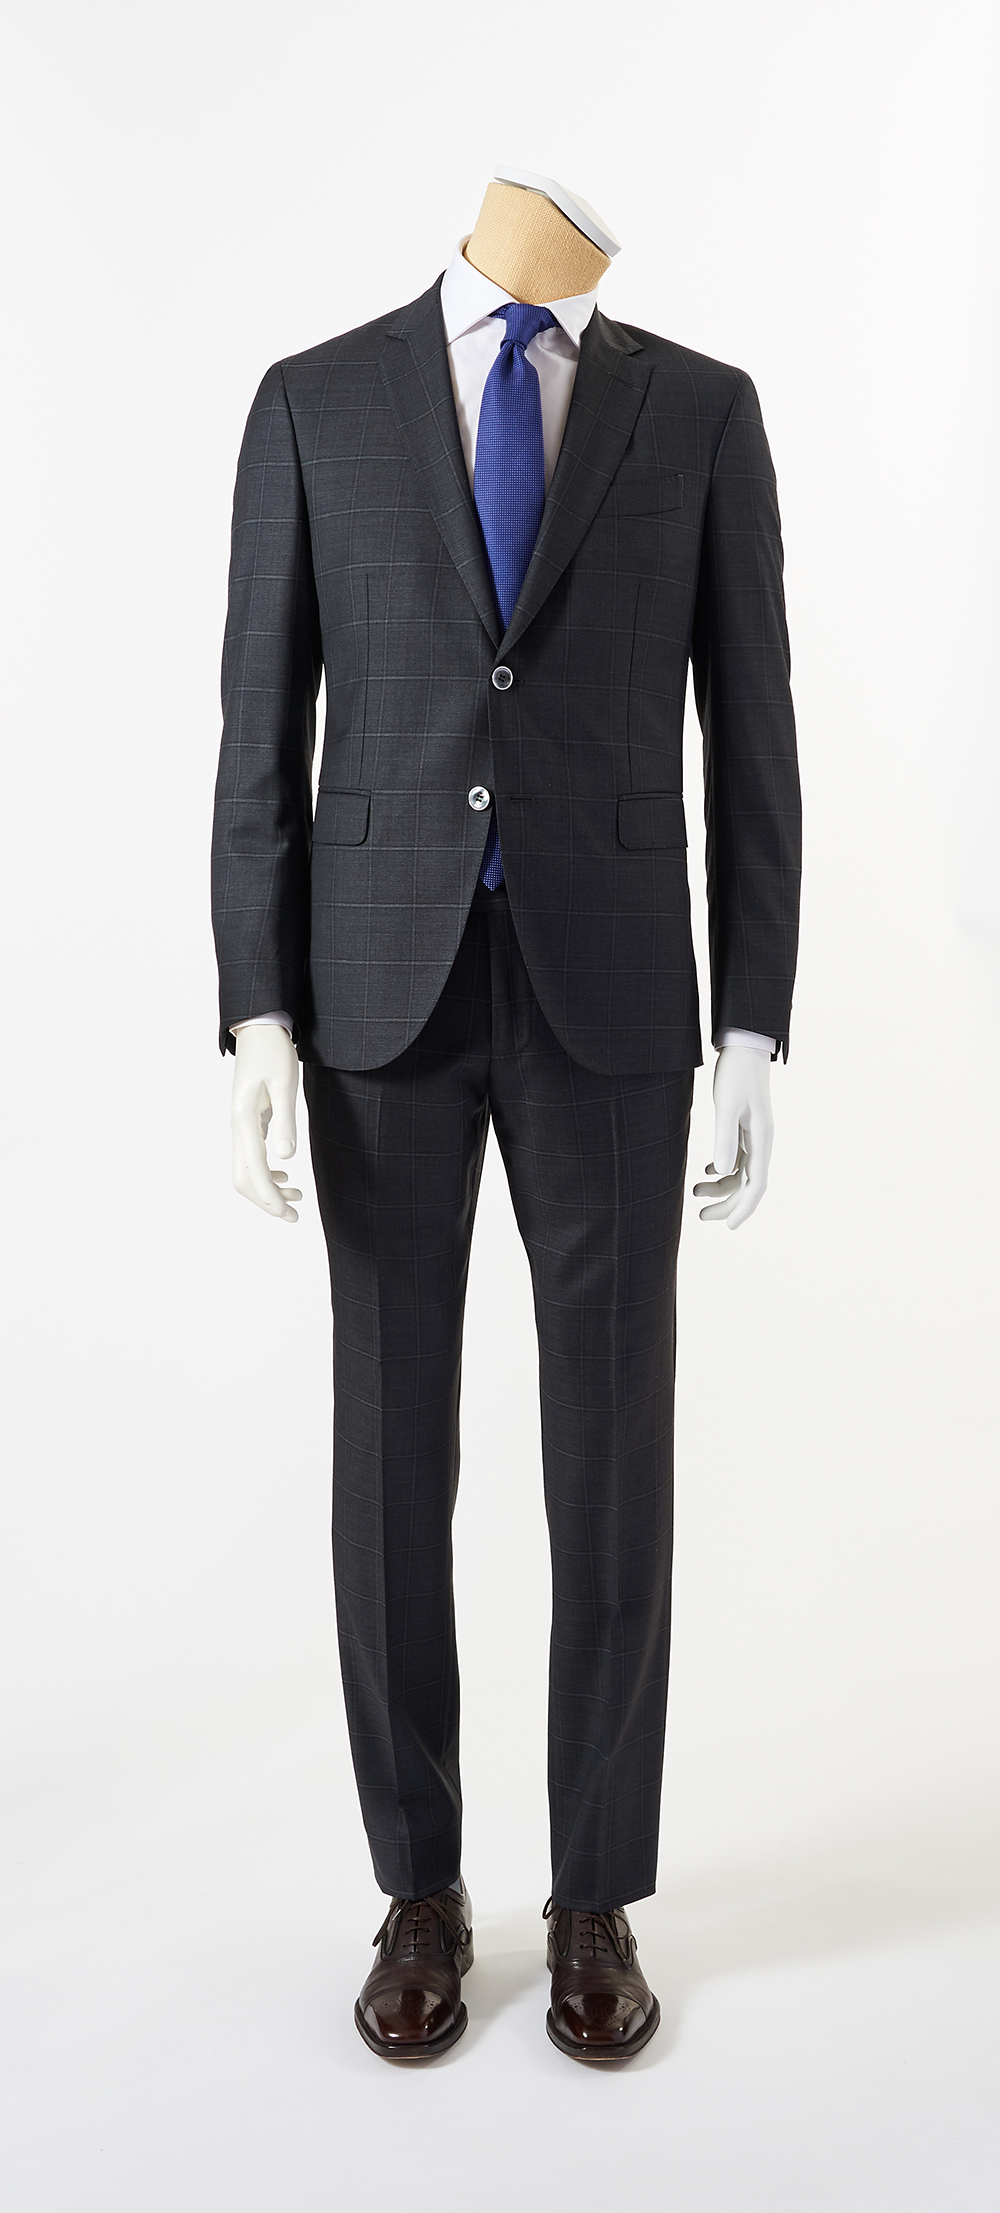 Calvaresi Suit - Charcoal Check Made In Italy